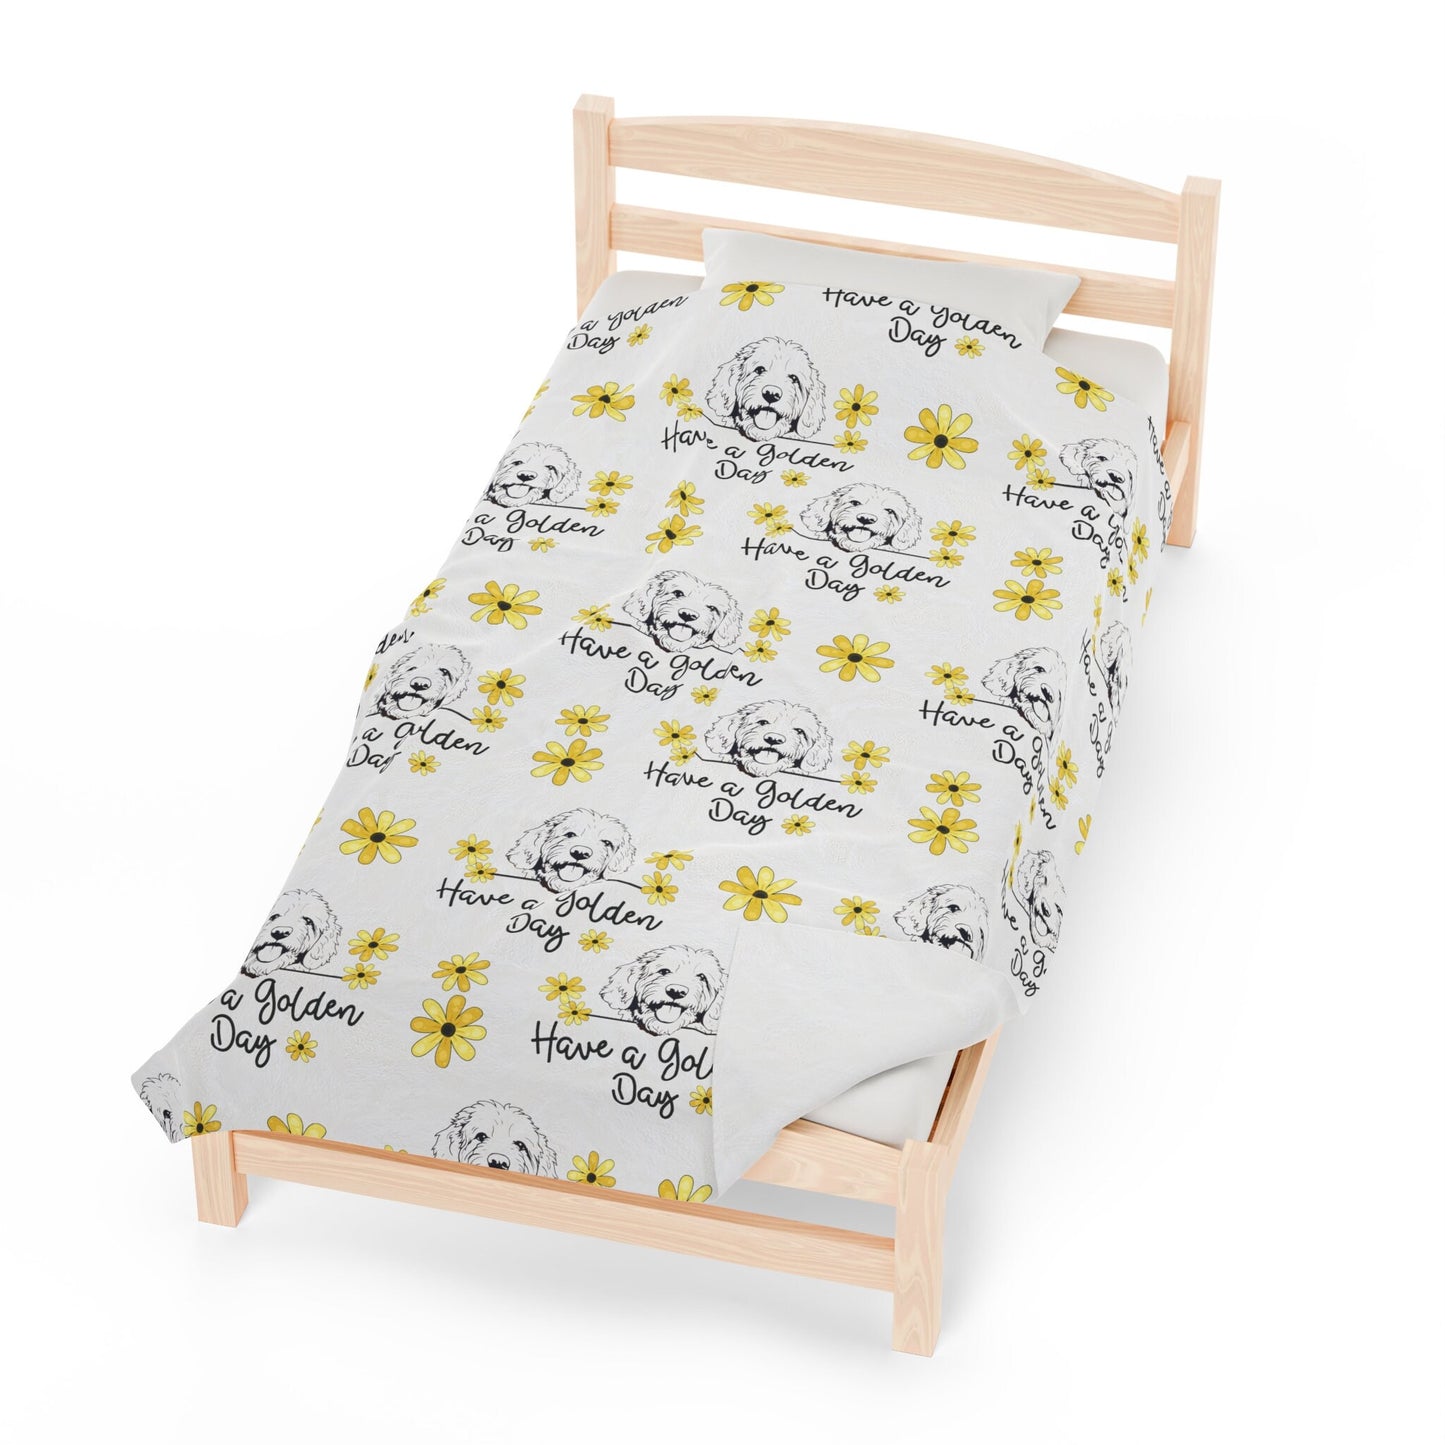 a small wooden bed with a white sheet with yellow flowers on it